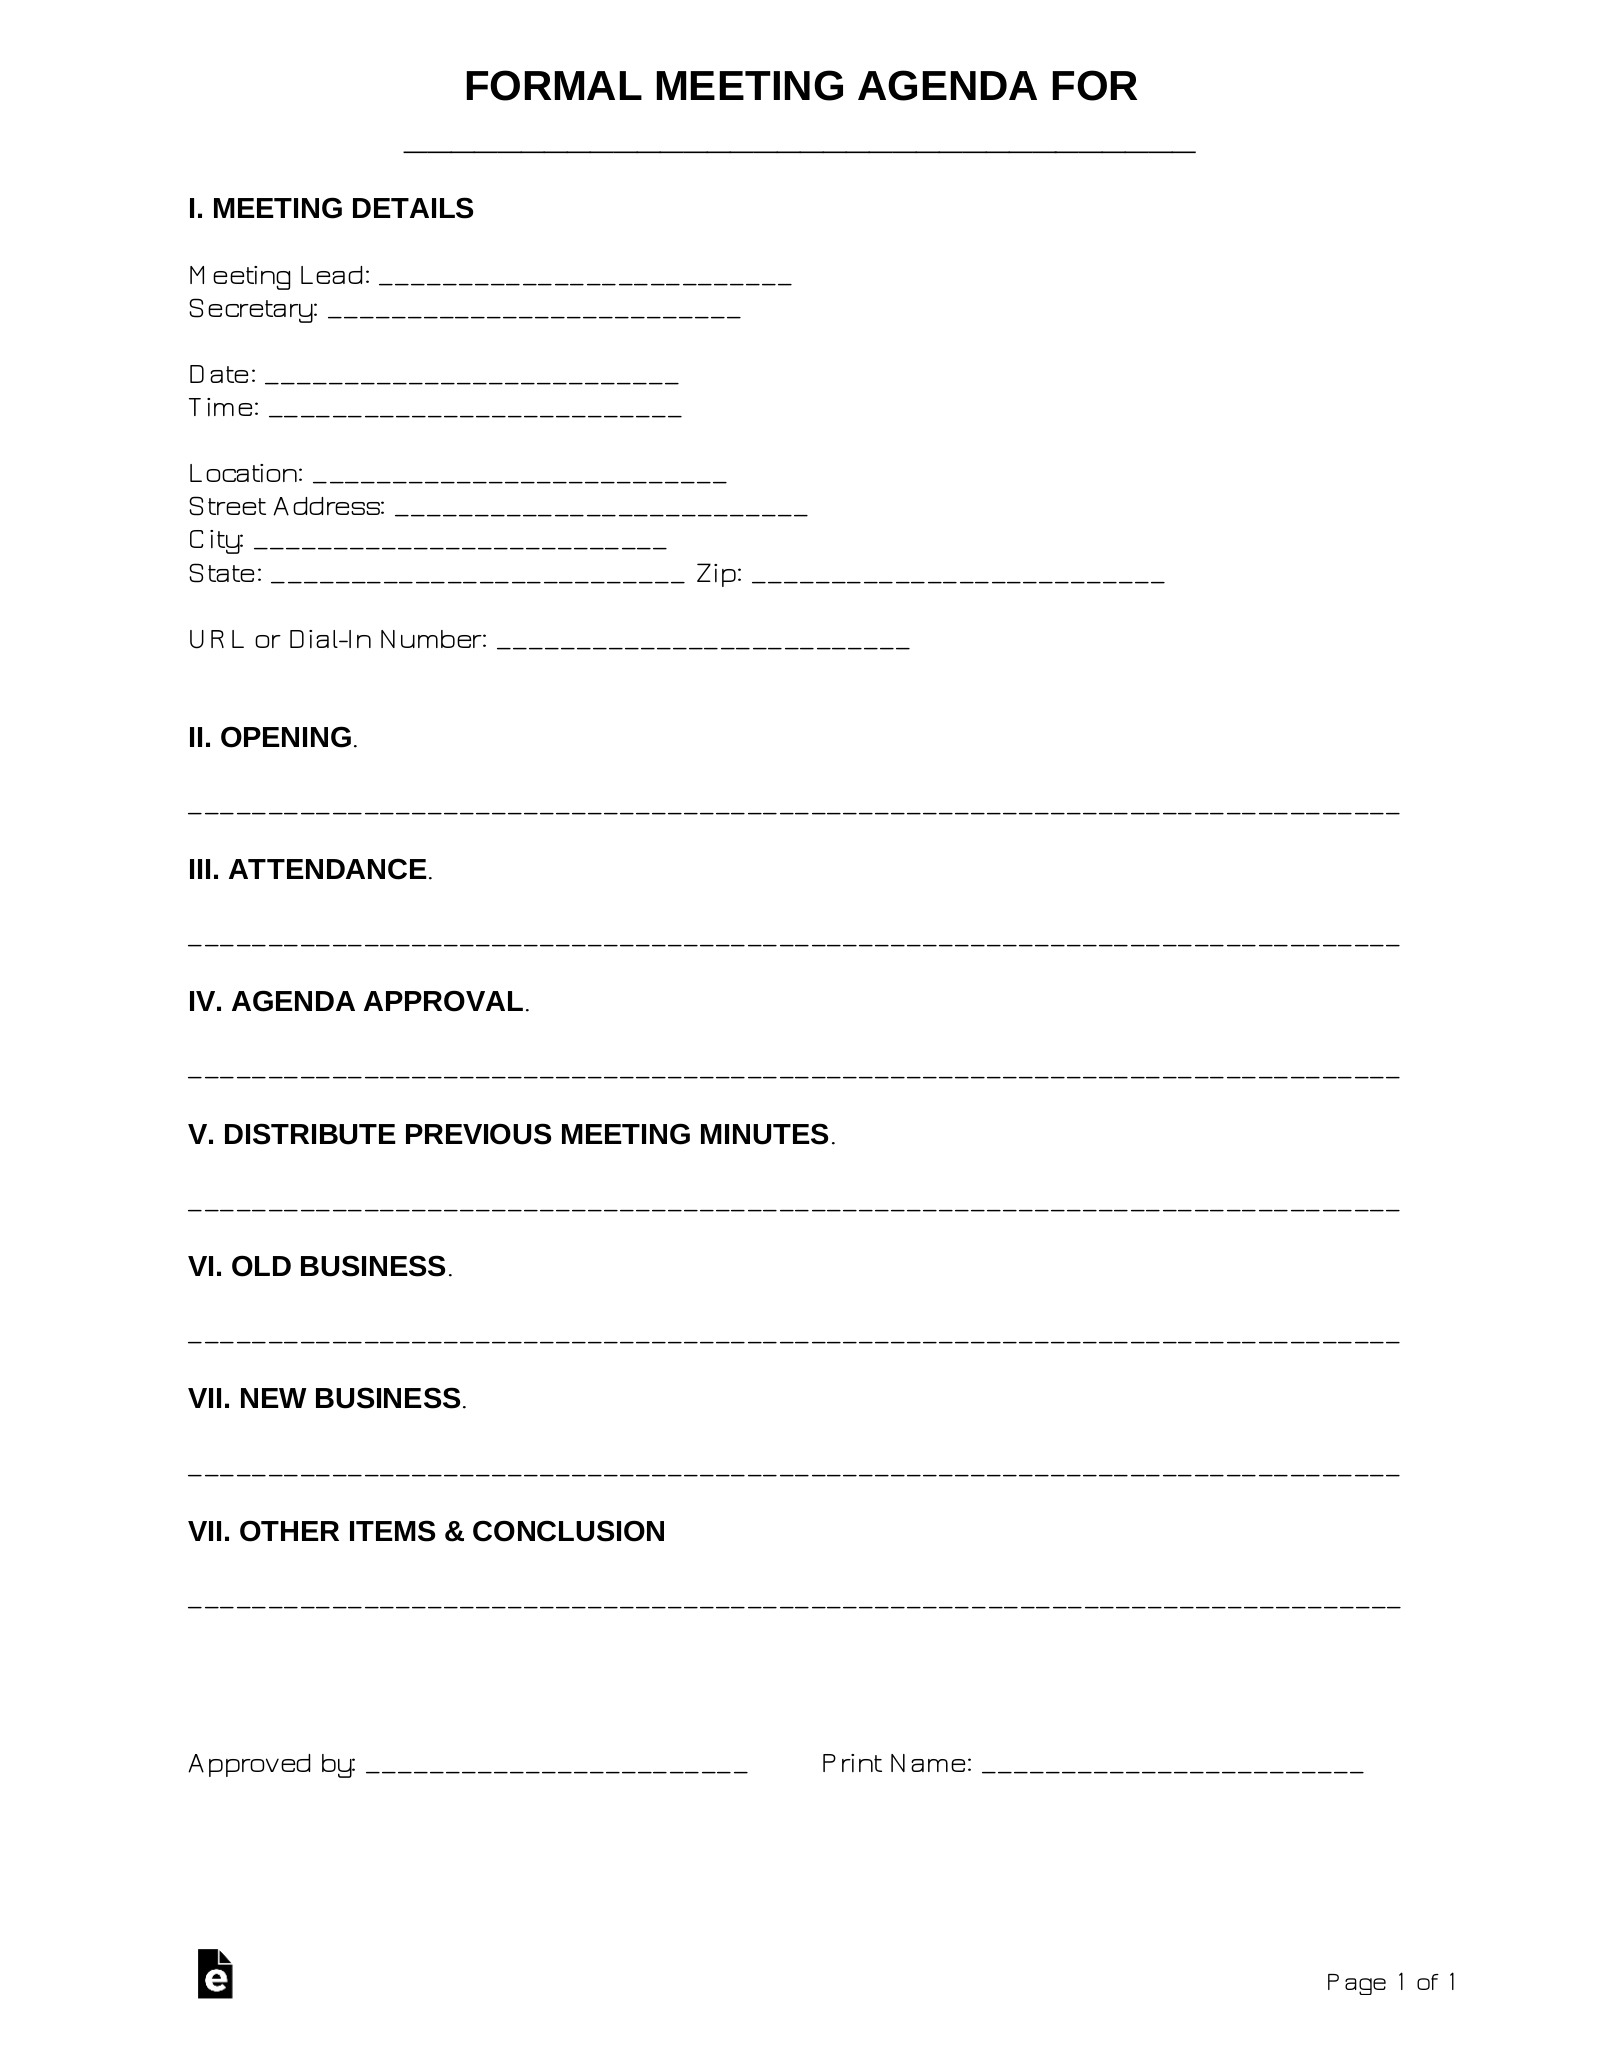 formal agenda template for a meeting